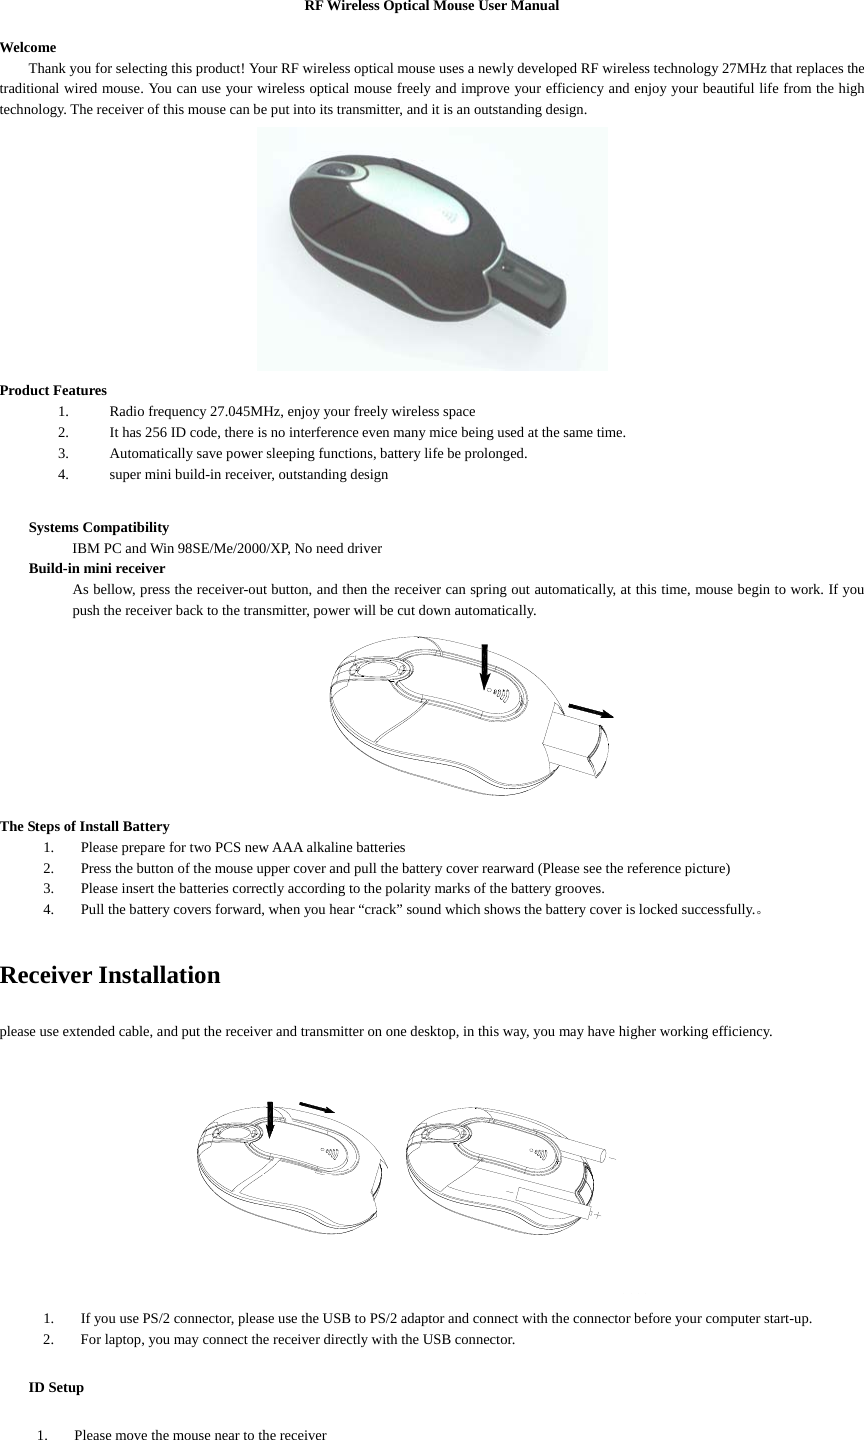 RF Wireless Optical Mouse User Manual  Welcome Thank you for selecting this product! Your RF wireless optical mouse uses a newly developed RF wireless technology 27MHz that replaces the traditional wired mouse. You can use your wireless optical mouse freely and improve your efficiency and enjoy your beautiful life from the high technology. The receiver of this mouse can be put into its transmitter, and it is an outstanding design.  Product Features 1. Radio frequency 27.045MHz, enjoy your freely wireless space 2. It has 256 ID code, there is no interference even many mice being used at the same time. 3. Automatically save power sleeping functions, battery life be prolonged. 4. super mini build-in receiver, outstanding design  Systems Compatibility     IBM PC and Win 98SE/Me/2000/XP, No need driver Build-in mini receiver As bellow, press the receiver-out button, and then the receiver can spring out automatically, at this time, mouse begin to work. If you push the receiver back to the transmitter, power will be cut down automatically.  The Steps of Install Battery 1. Please prepare for two PCS new AAA alkaline batteries 2. Press the button of the mouse upper cover and pull the battery cover rearward (Please see the reference picture) 3. Please insert the batteries correctly according to the polarity marks of the battery grooves. 4. Pull the battery covers forward, when you hear “crack” sound which shows the battery cover is locked successfully.。  Receiver Installation please use extended cable, and put the receiver and transmitter on one desktop, in this way, you may have higher working efficiency.     1. If you use PS/2 connector, please use the USB to PS/2 adaptor and connect with the connector before your computer start-up. 2. For laptop, you may connect the receiver directly with the USB connector. ID Setup 1. Please move the mouse near to the receiver 